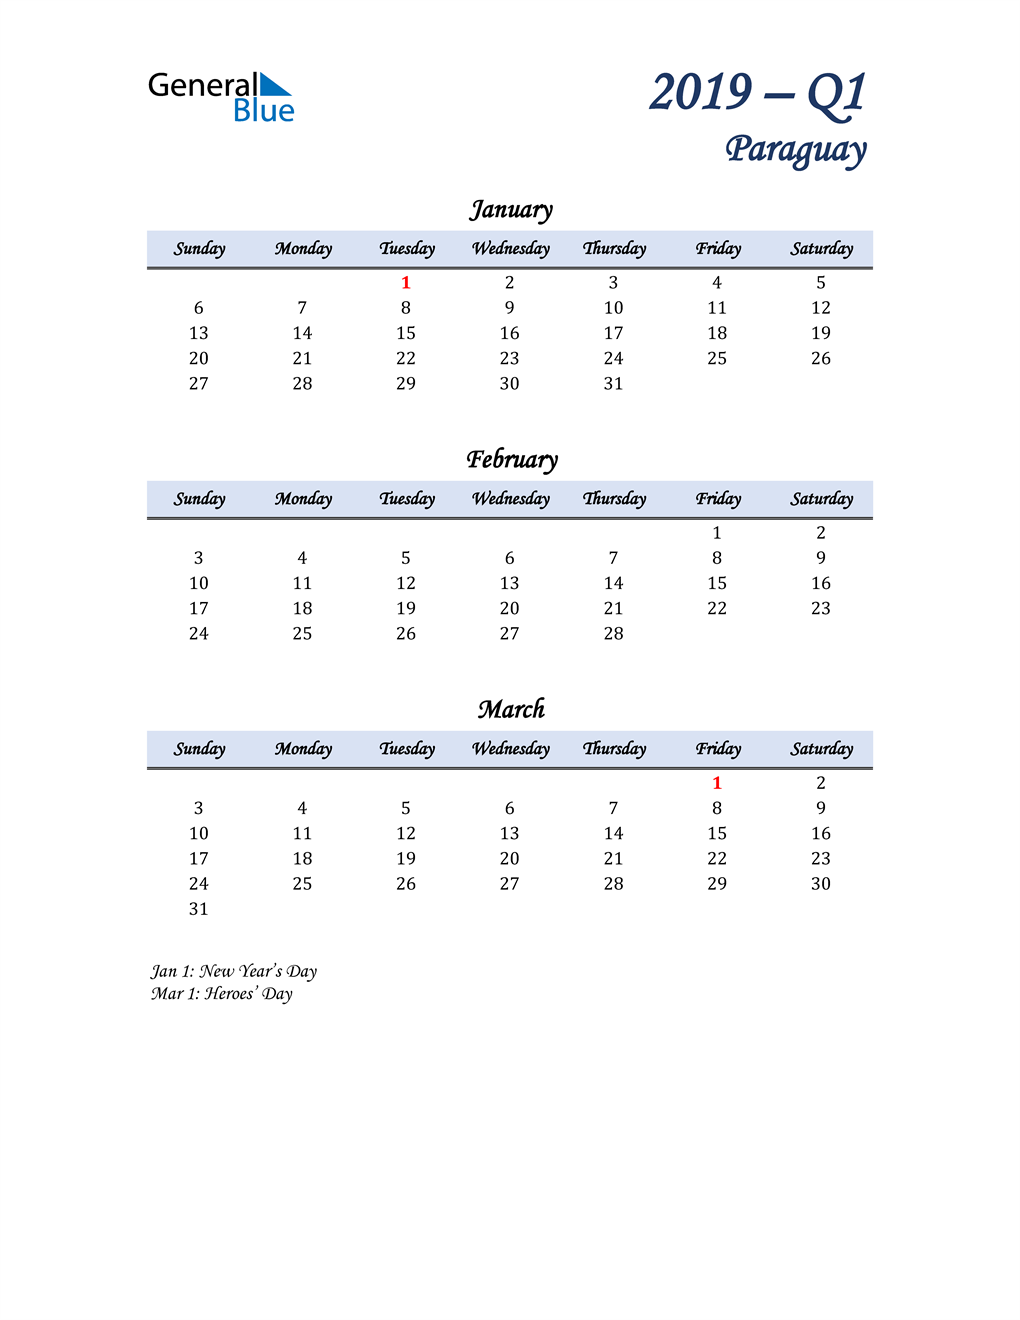  January, February, and March Calendar for Paraguay